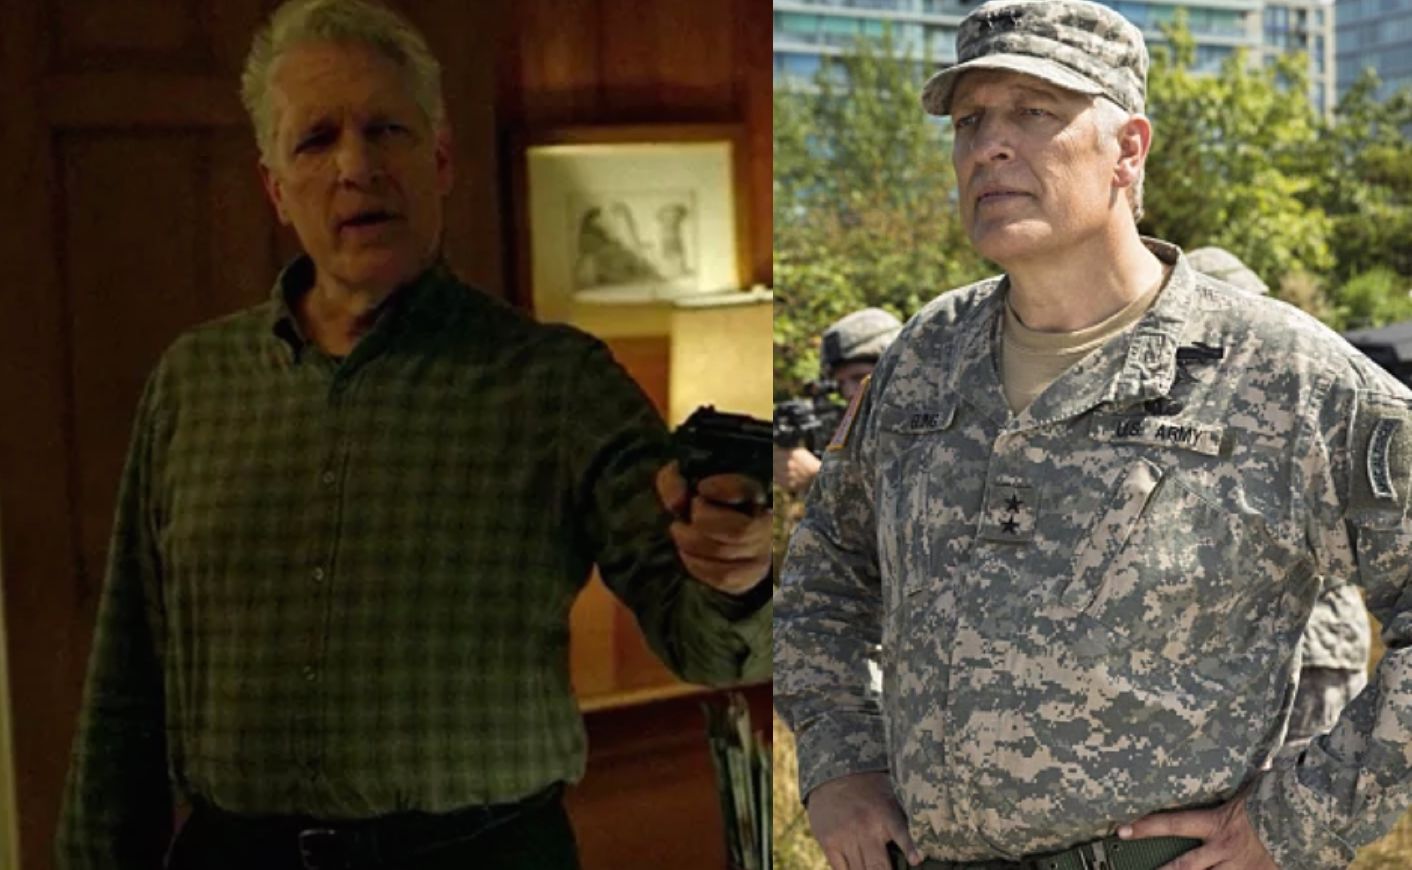 Clancy Brown in Daredevil and The Flash